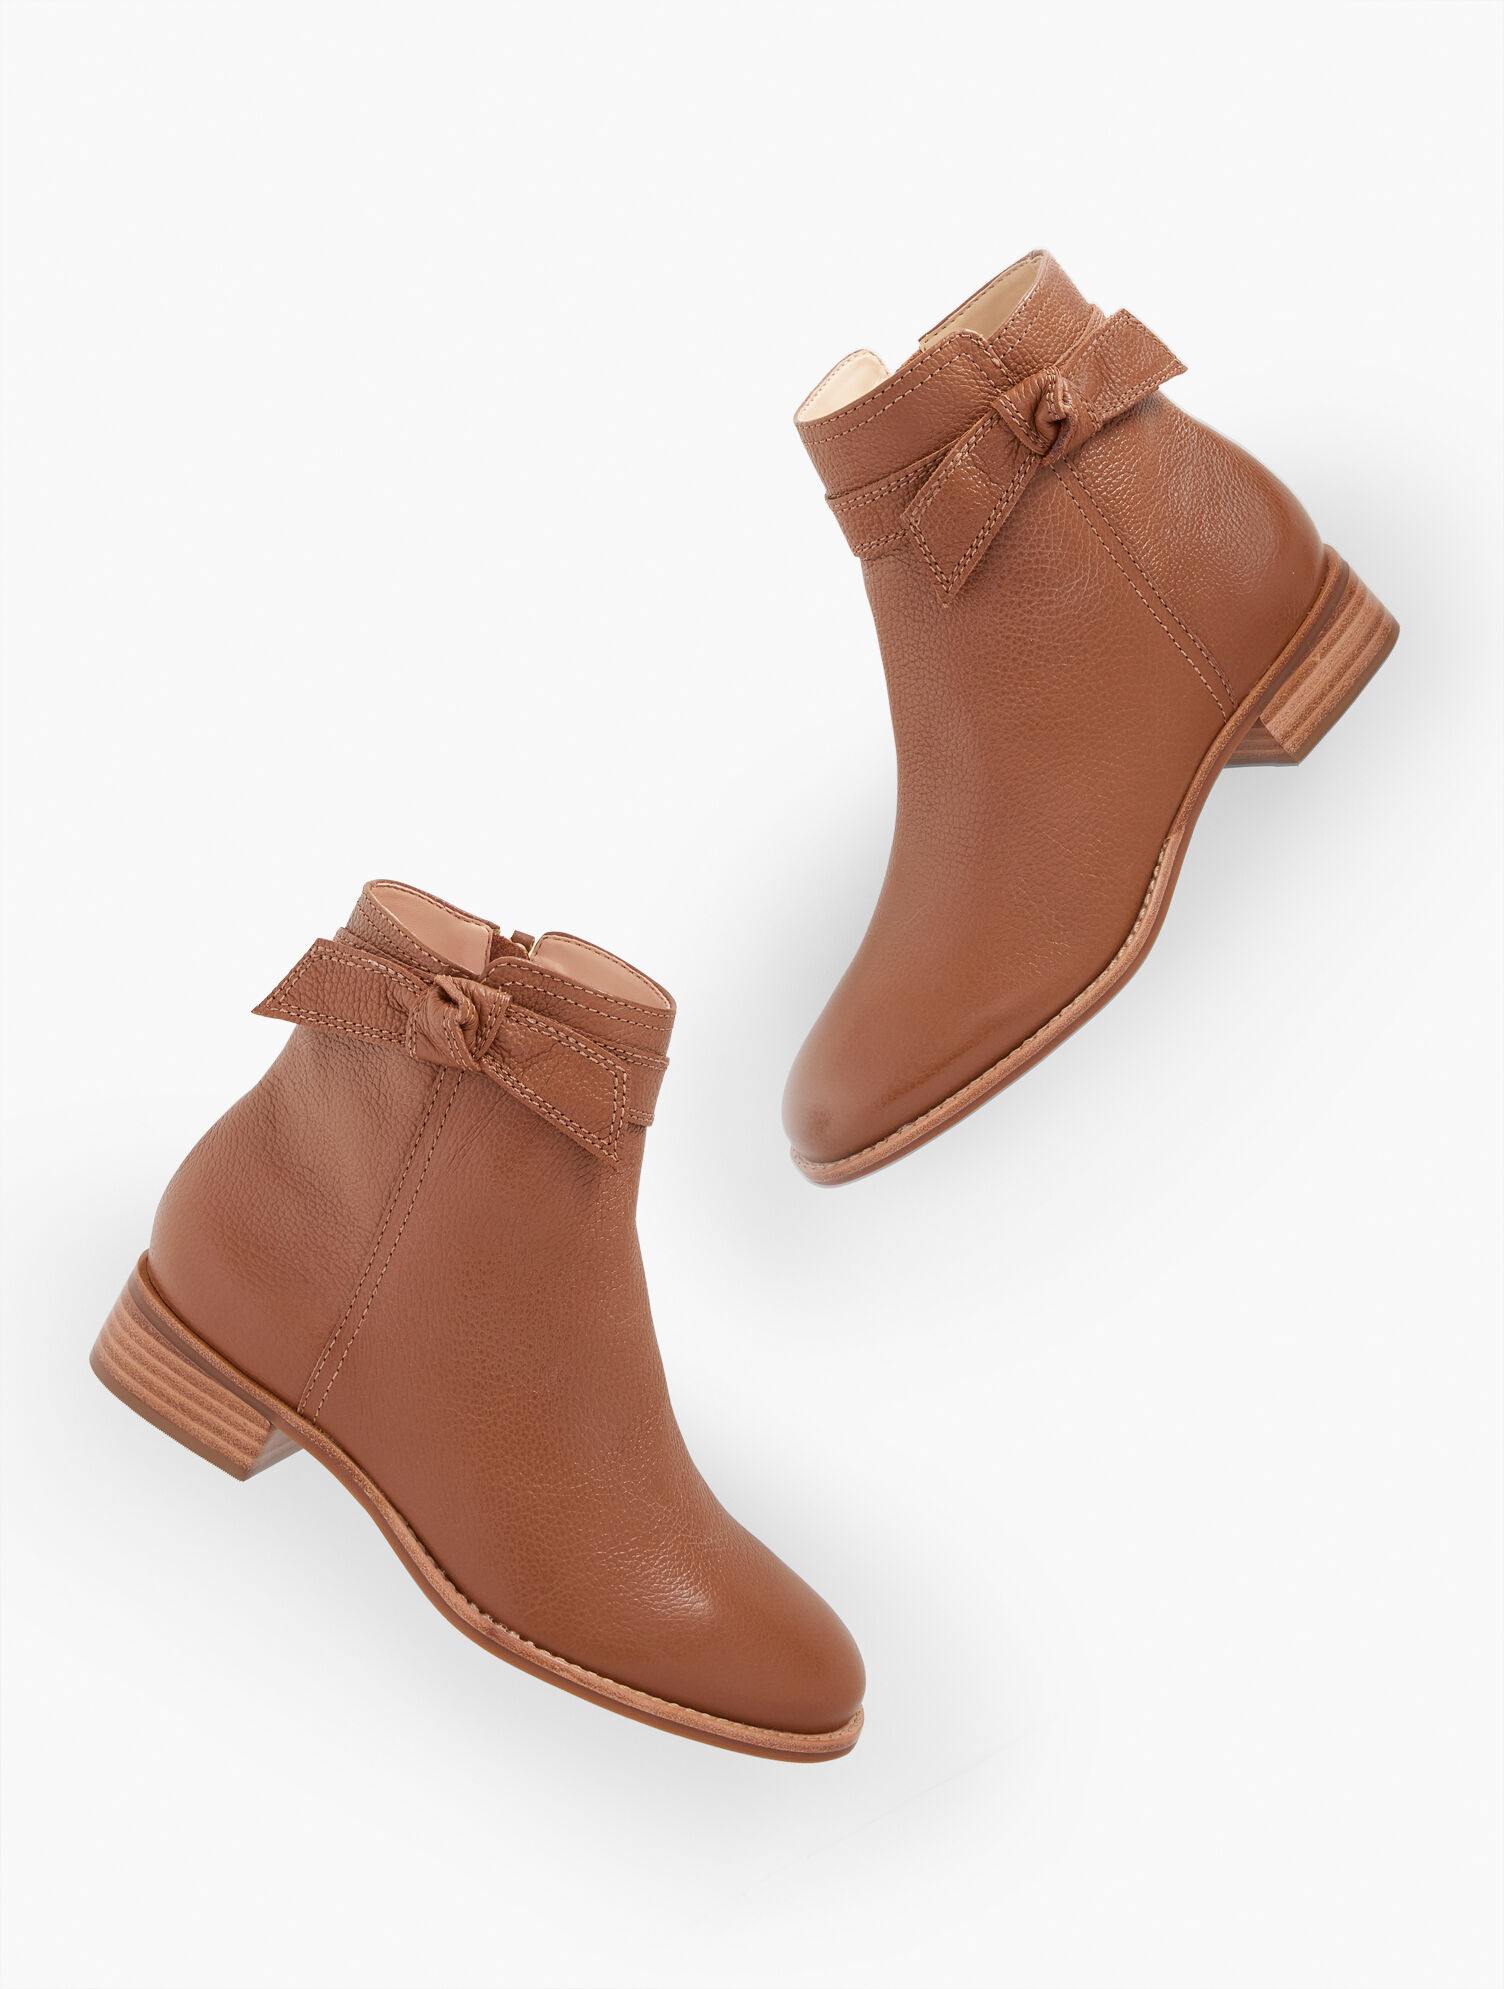 Tish Bow Ankle Boots - Pebble Leather | Talbots